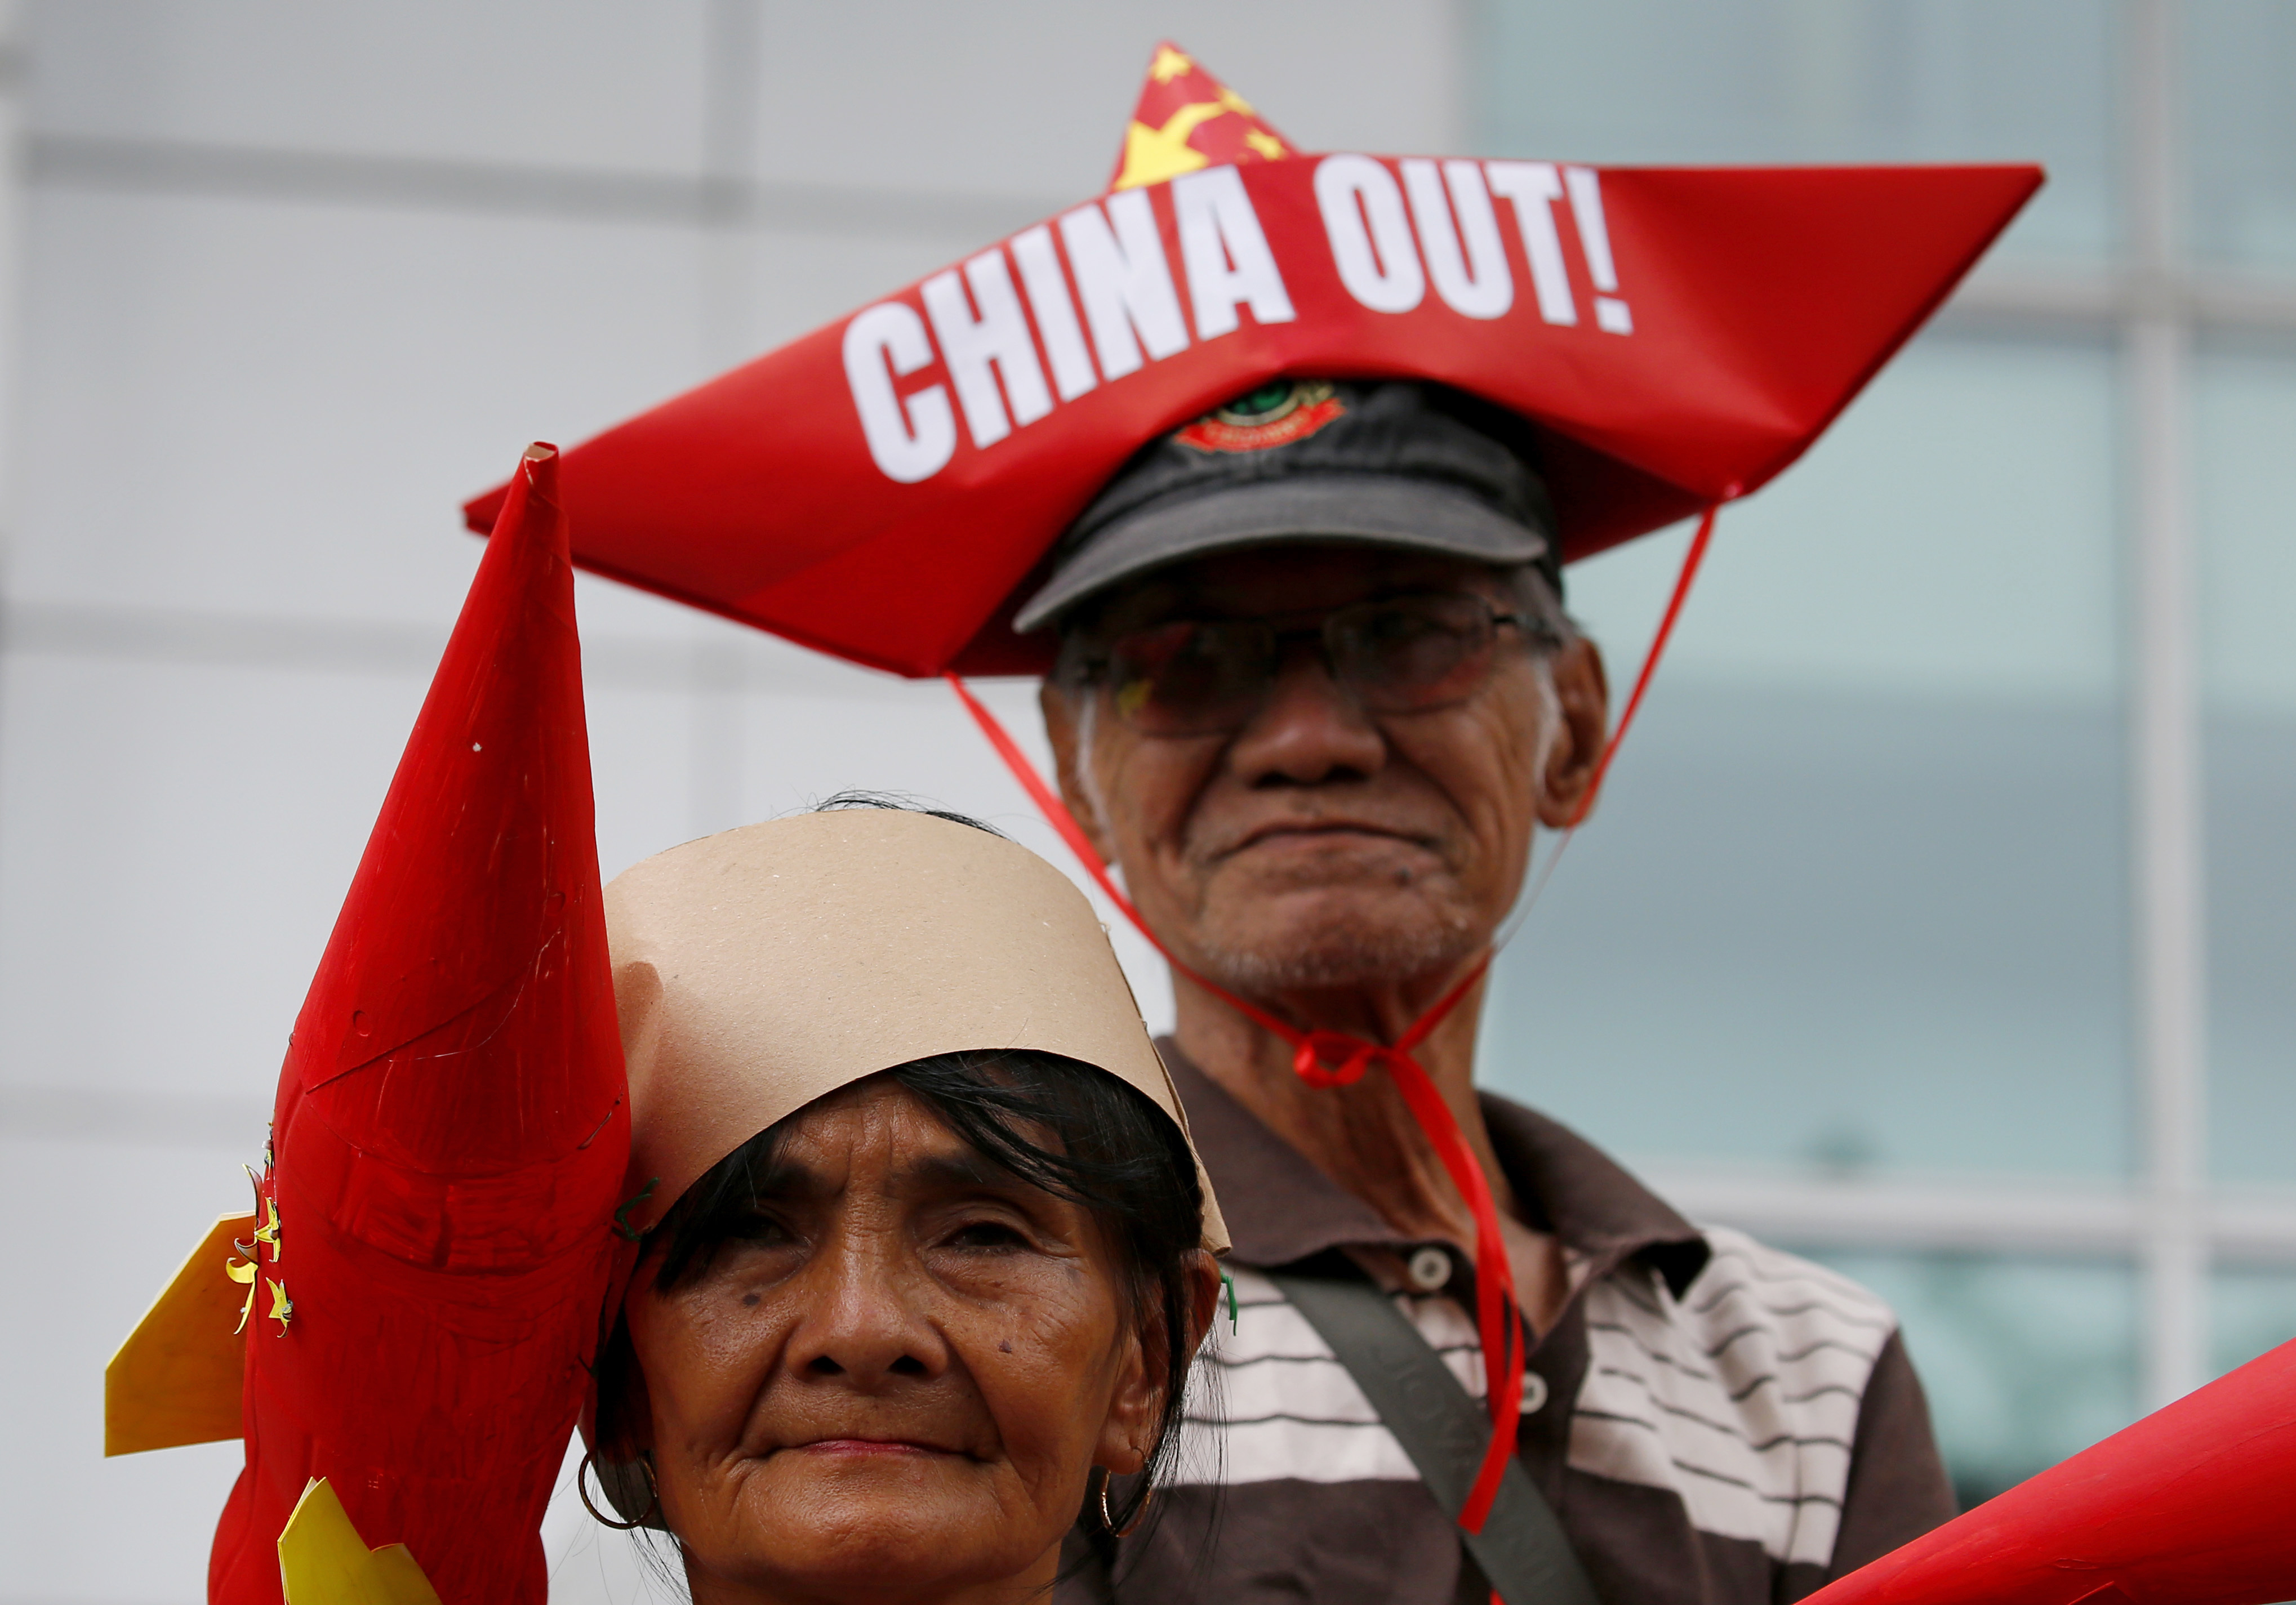 Protesters, one wearing boat-shaped paper hat and another with a mock missile, join other protesters in a rally at the Chinese Consulate to protest China's alleged continued militarization of the disputed islands in the South China Sea known as Spratlys Saturday, Feb. 10, 2018 in the financial district of Makati city east of Manila, Philippines. The protesters also denounced President Rodrigo Duterte's inaction over China's continued build up of military facilities and structures at the disputed islands. (AP Photo/Bullit Marquez)